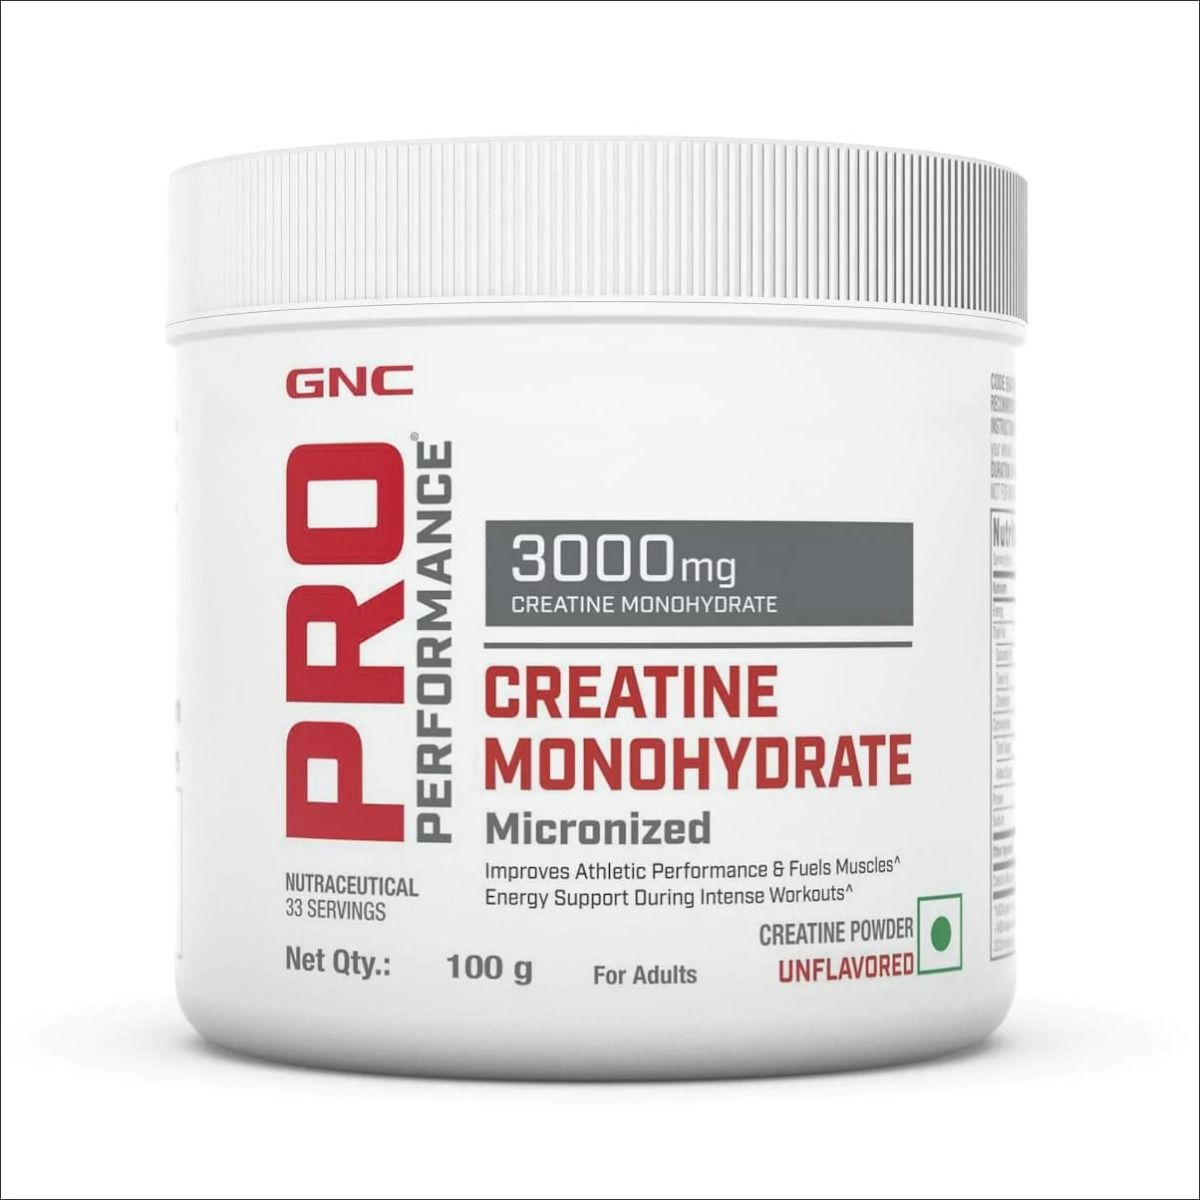 Buy GNC PRO Performance Creatine Monohydrate 3000 mg Unflavored Powder, 100 gm Online